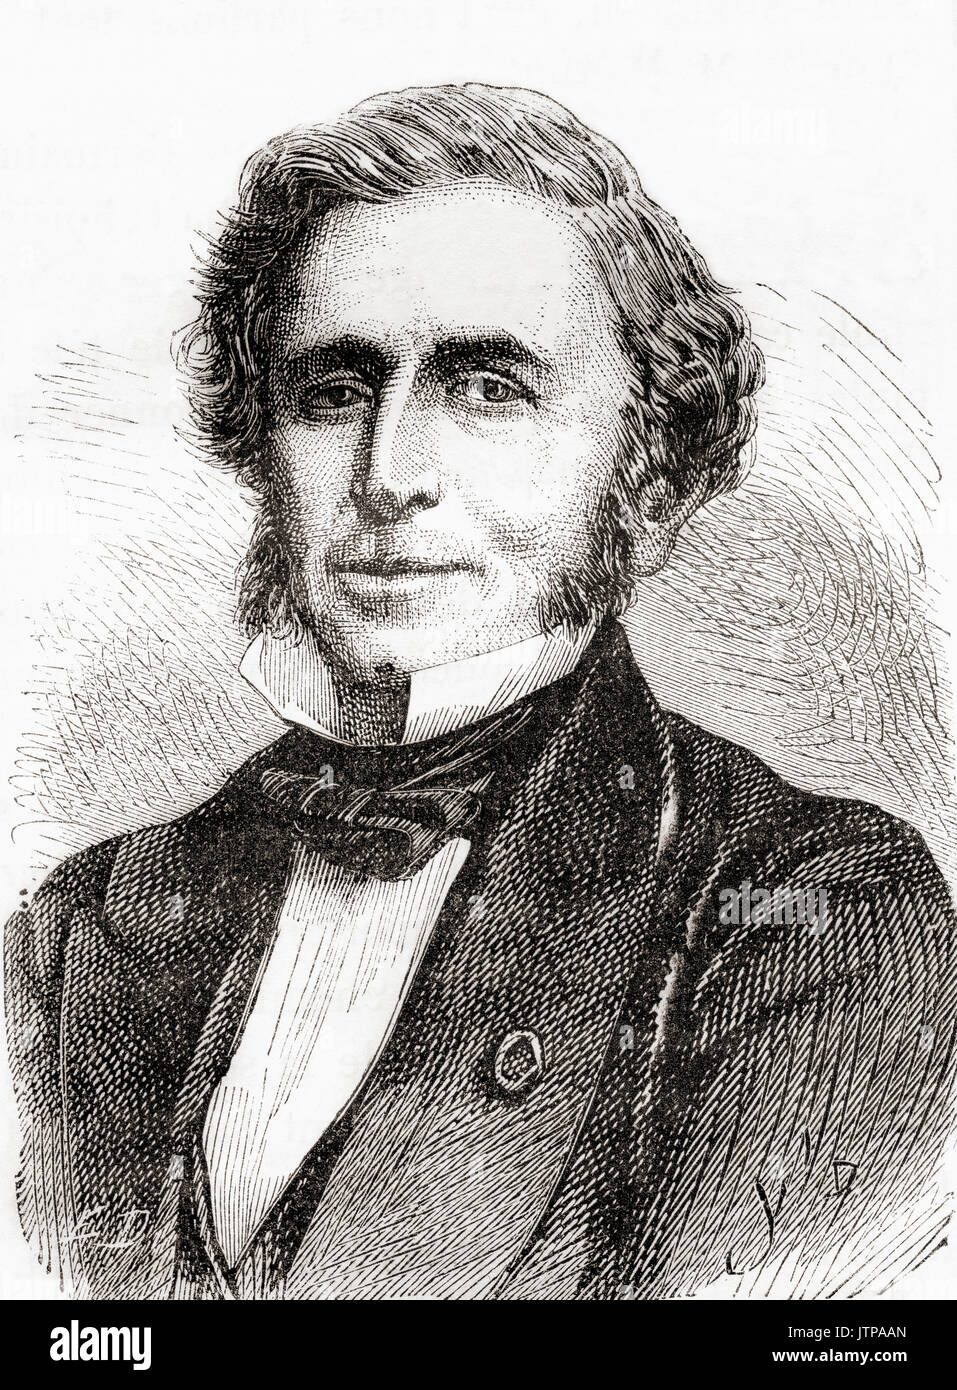 Émile Péreire, 1800 – 1875.  Prominent 19th-century financier in Paris, France. Founder, with his brother Isaac, of a business conglomerate that included creating the Crédit Mobilier bank. From Les Merveilles de la Science, published 1870. Stock Photo